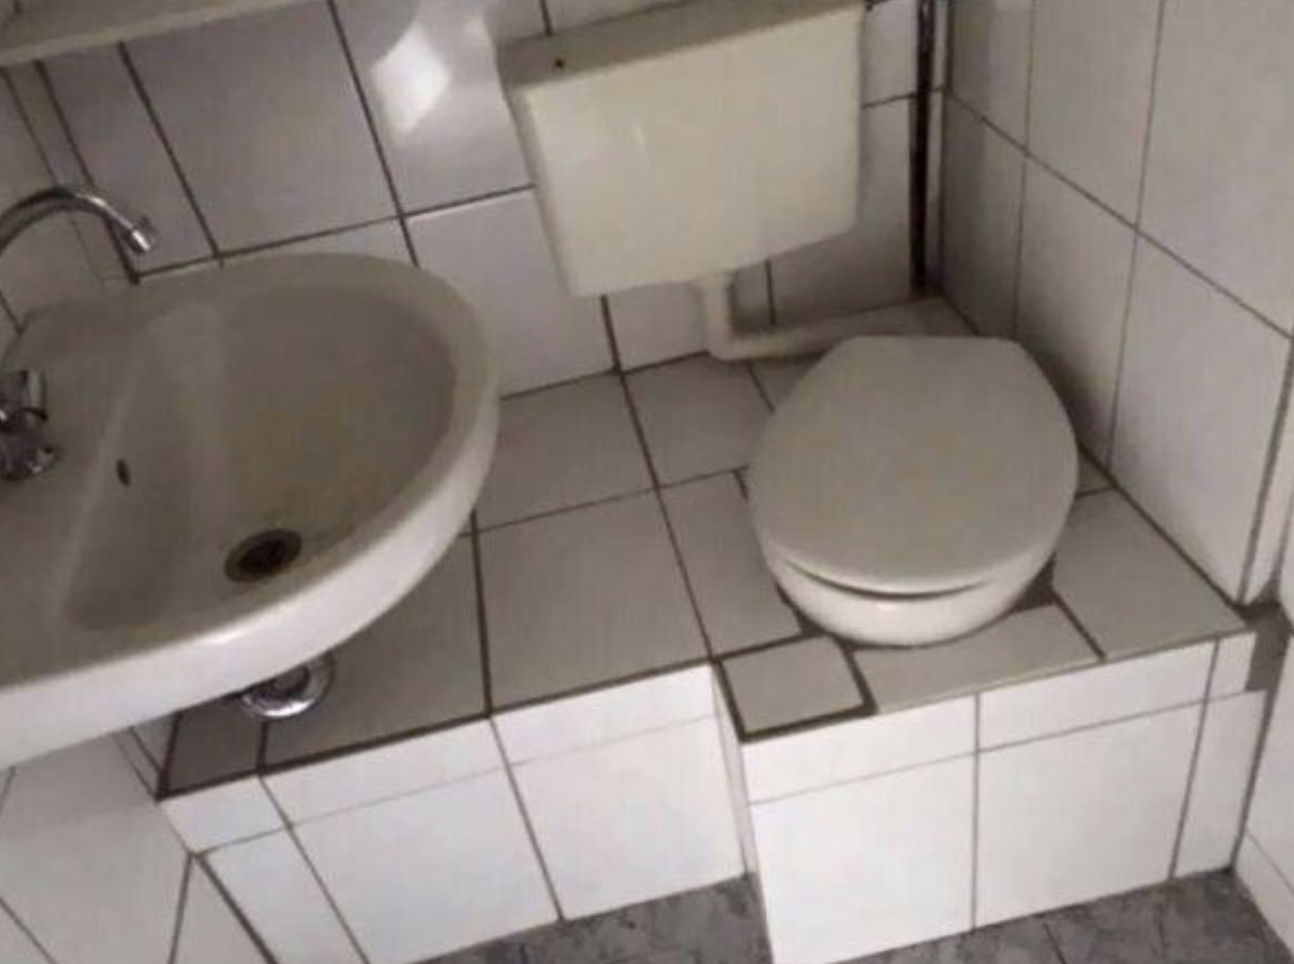 tile is completely covering the toilet area